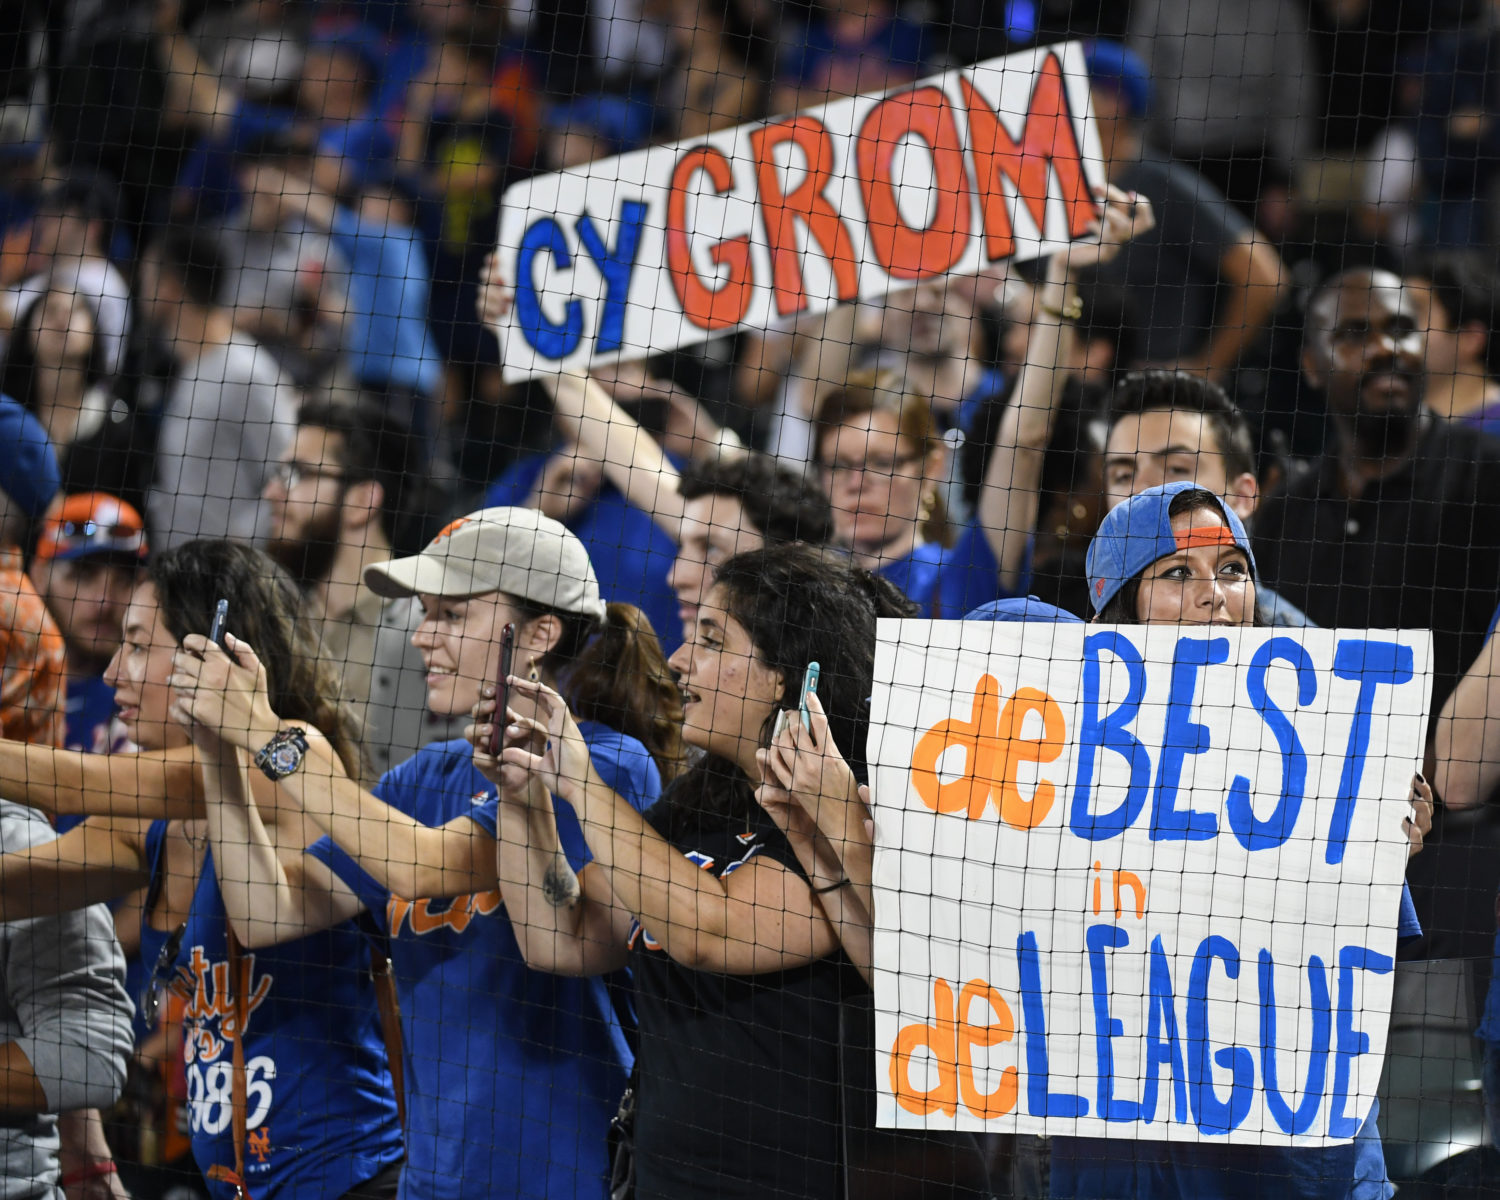 Fans Hold Up Signs for Jacob deGrom during Game on September 26, 2018